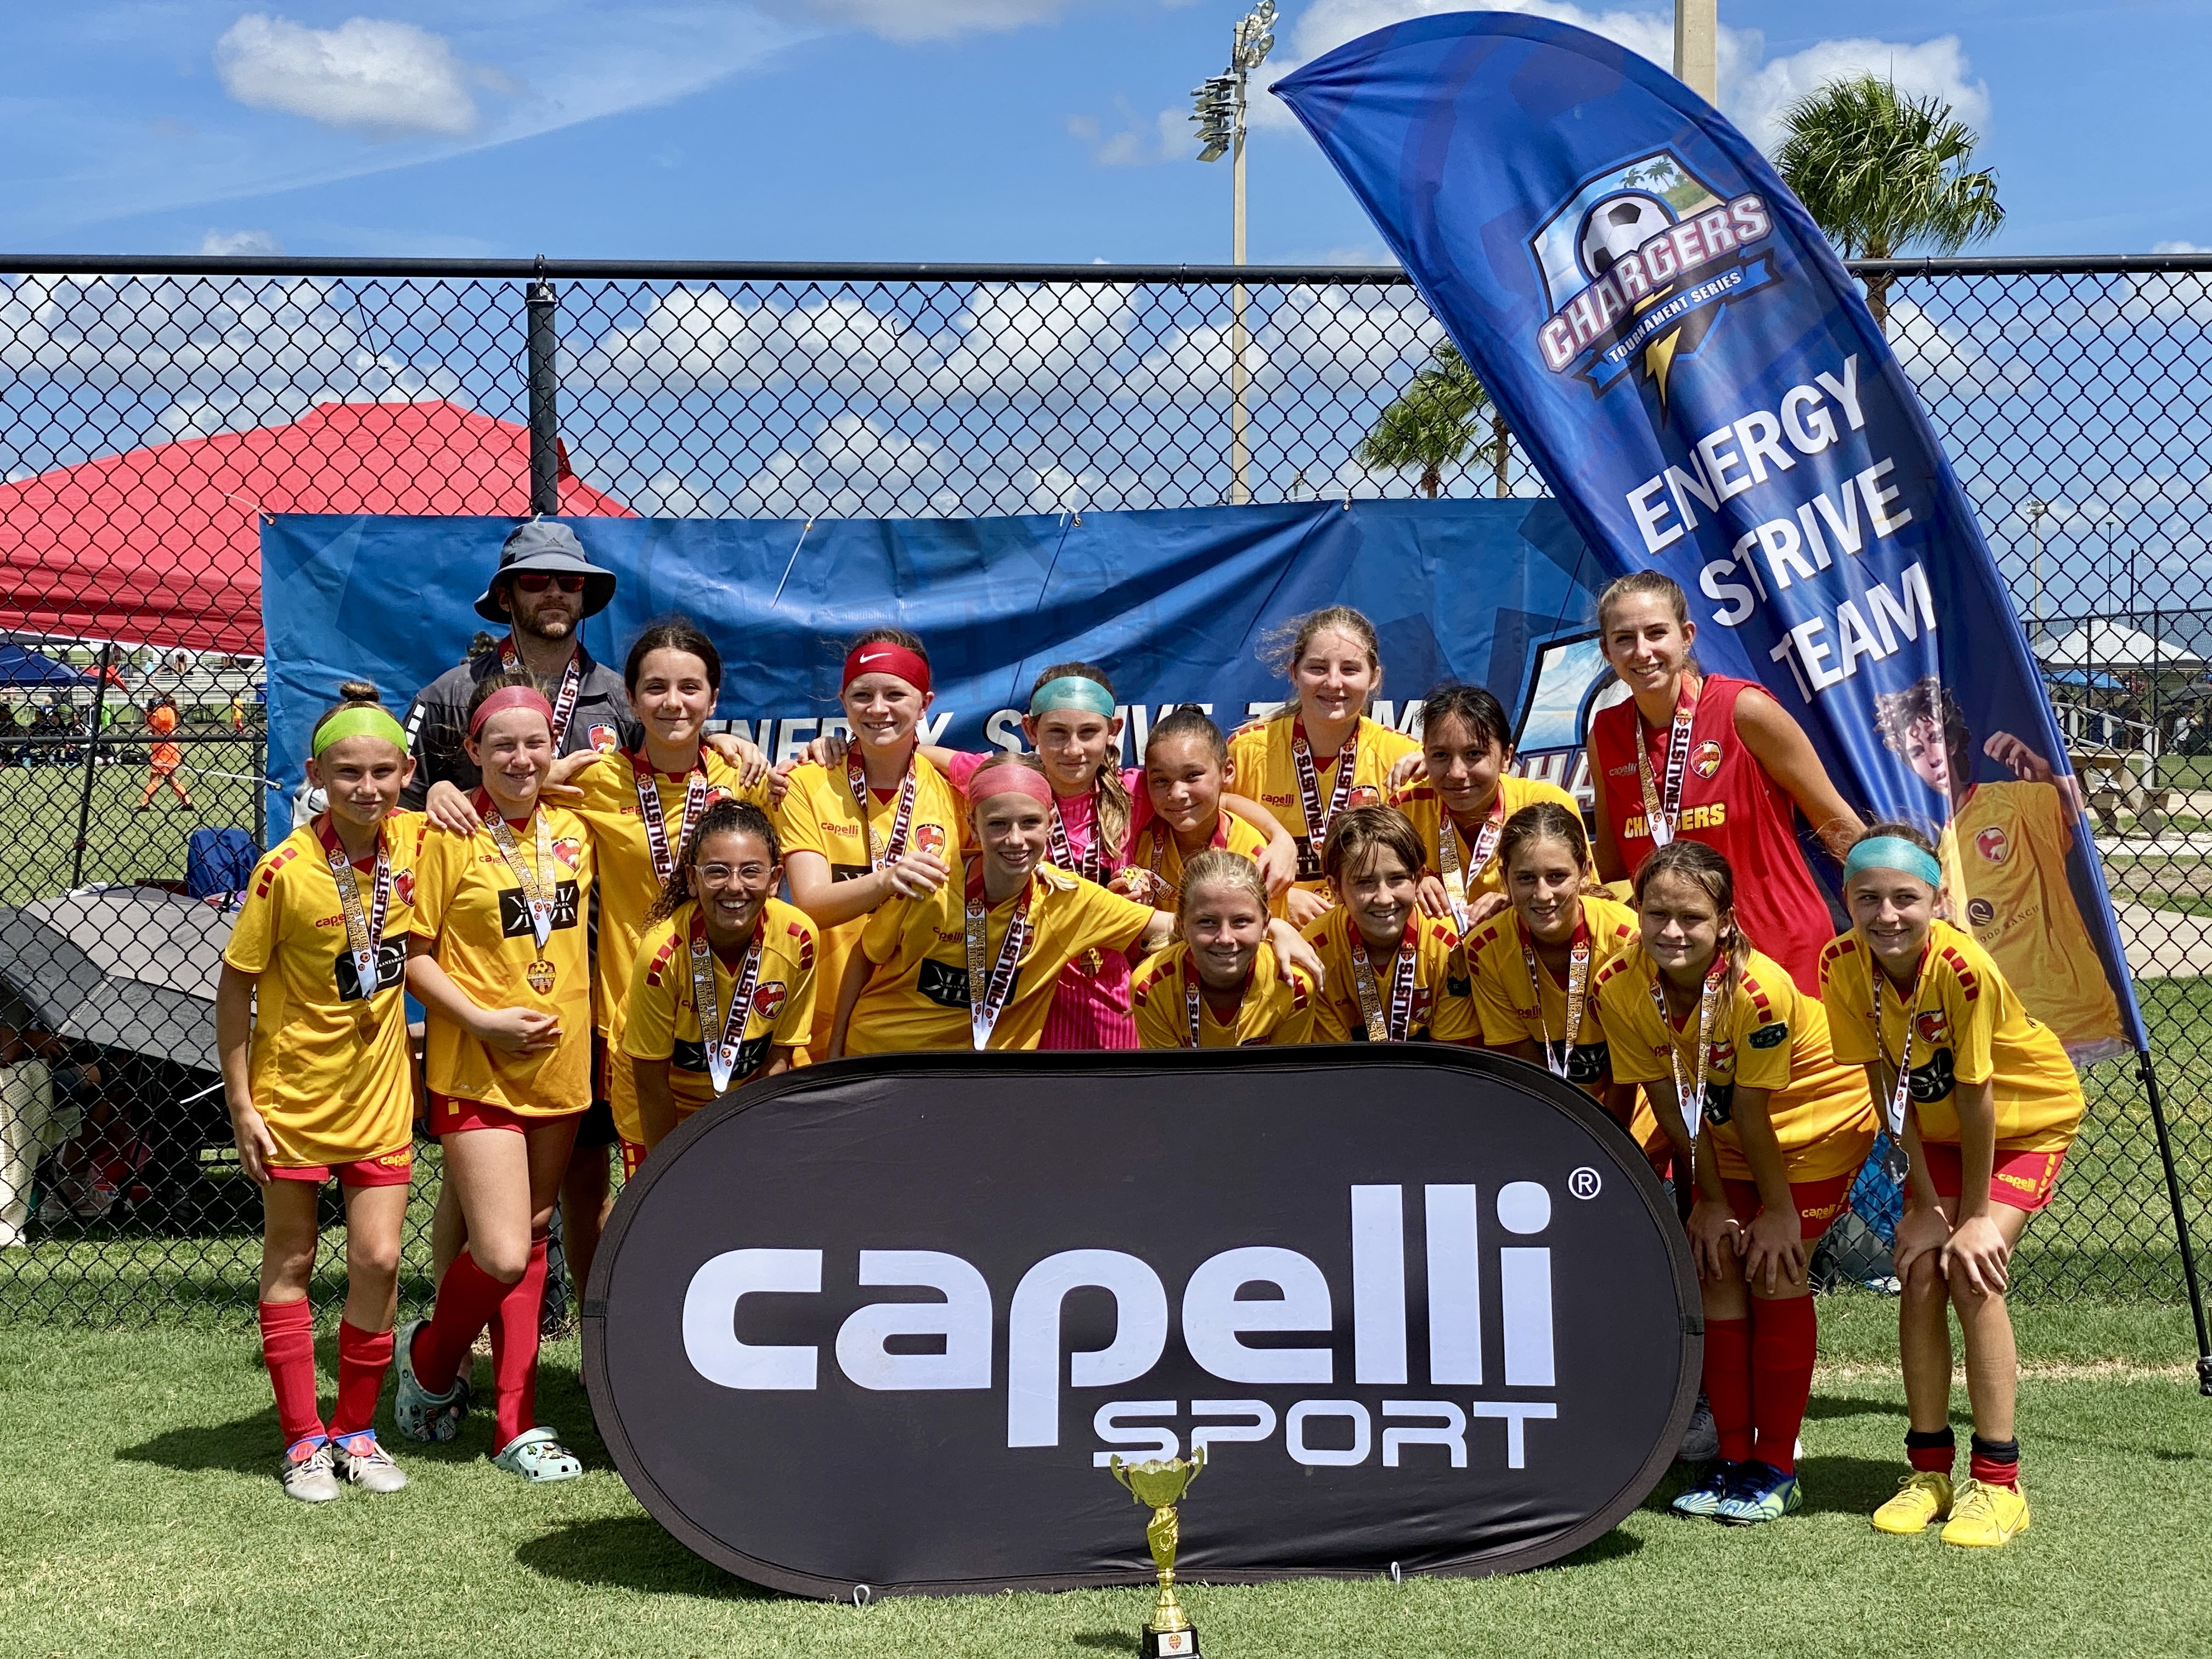 Clearwater U13 Premier Team Finalists in the Chargers Labor Day Tournament 